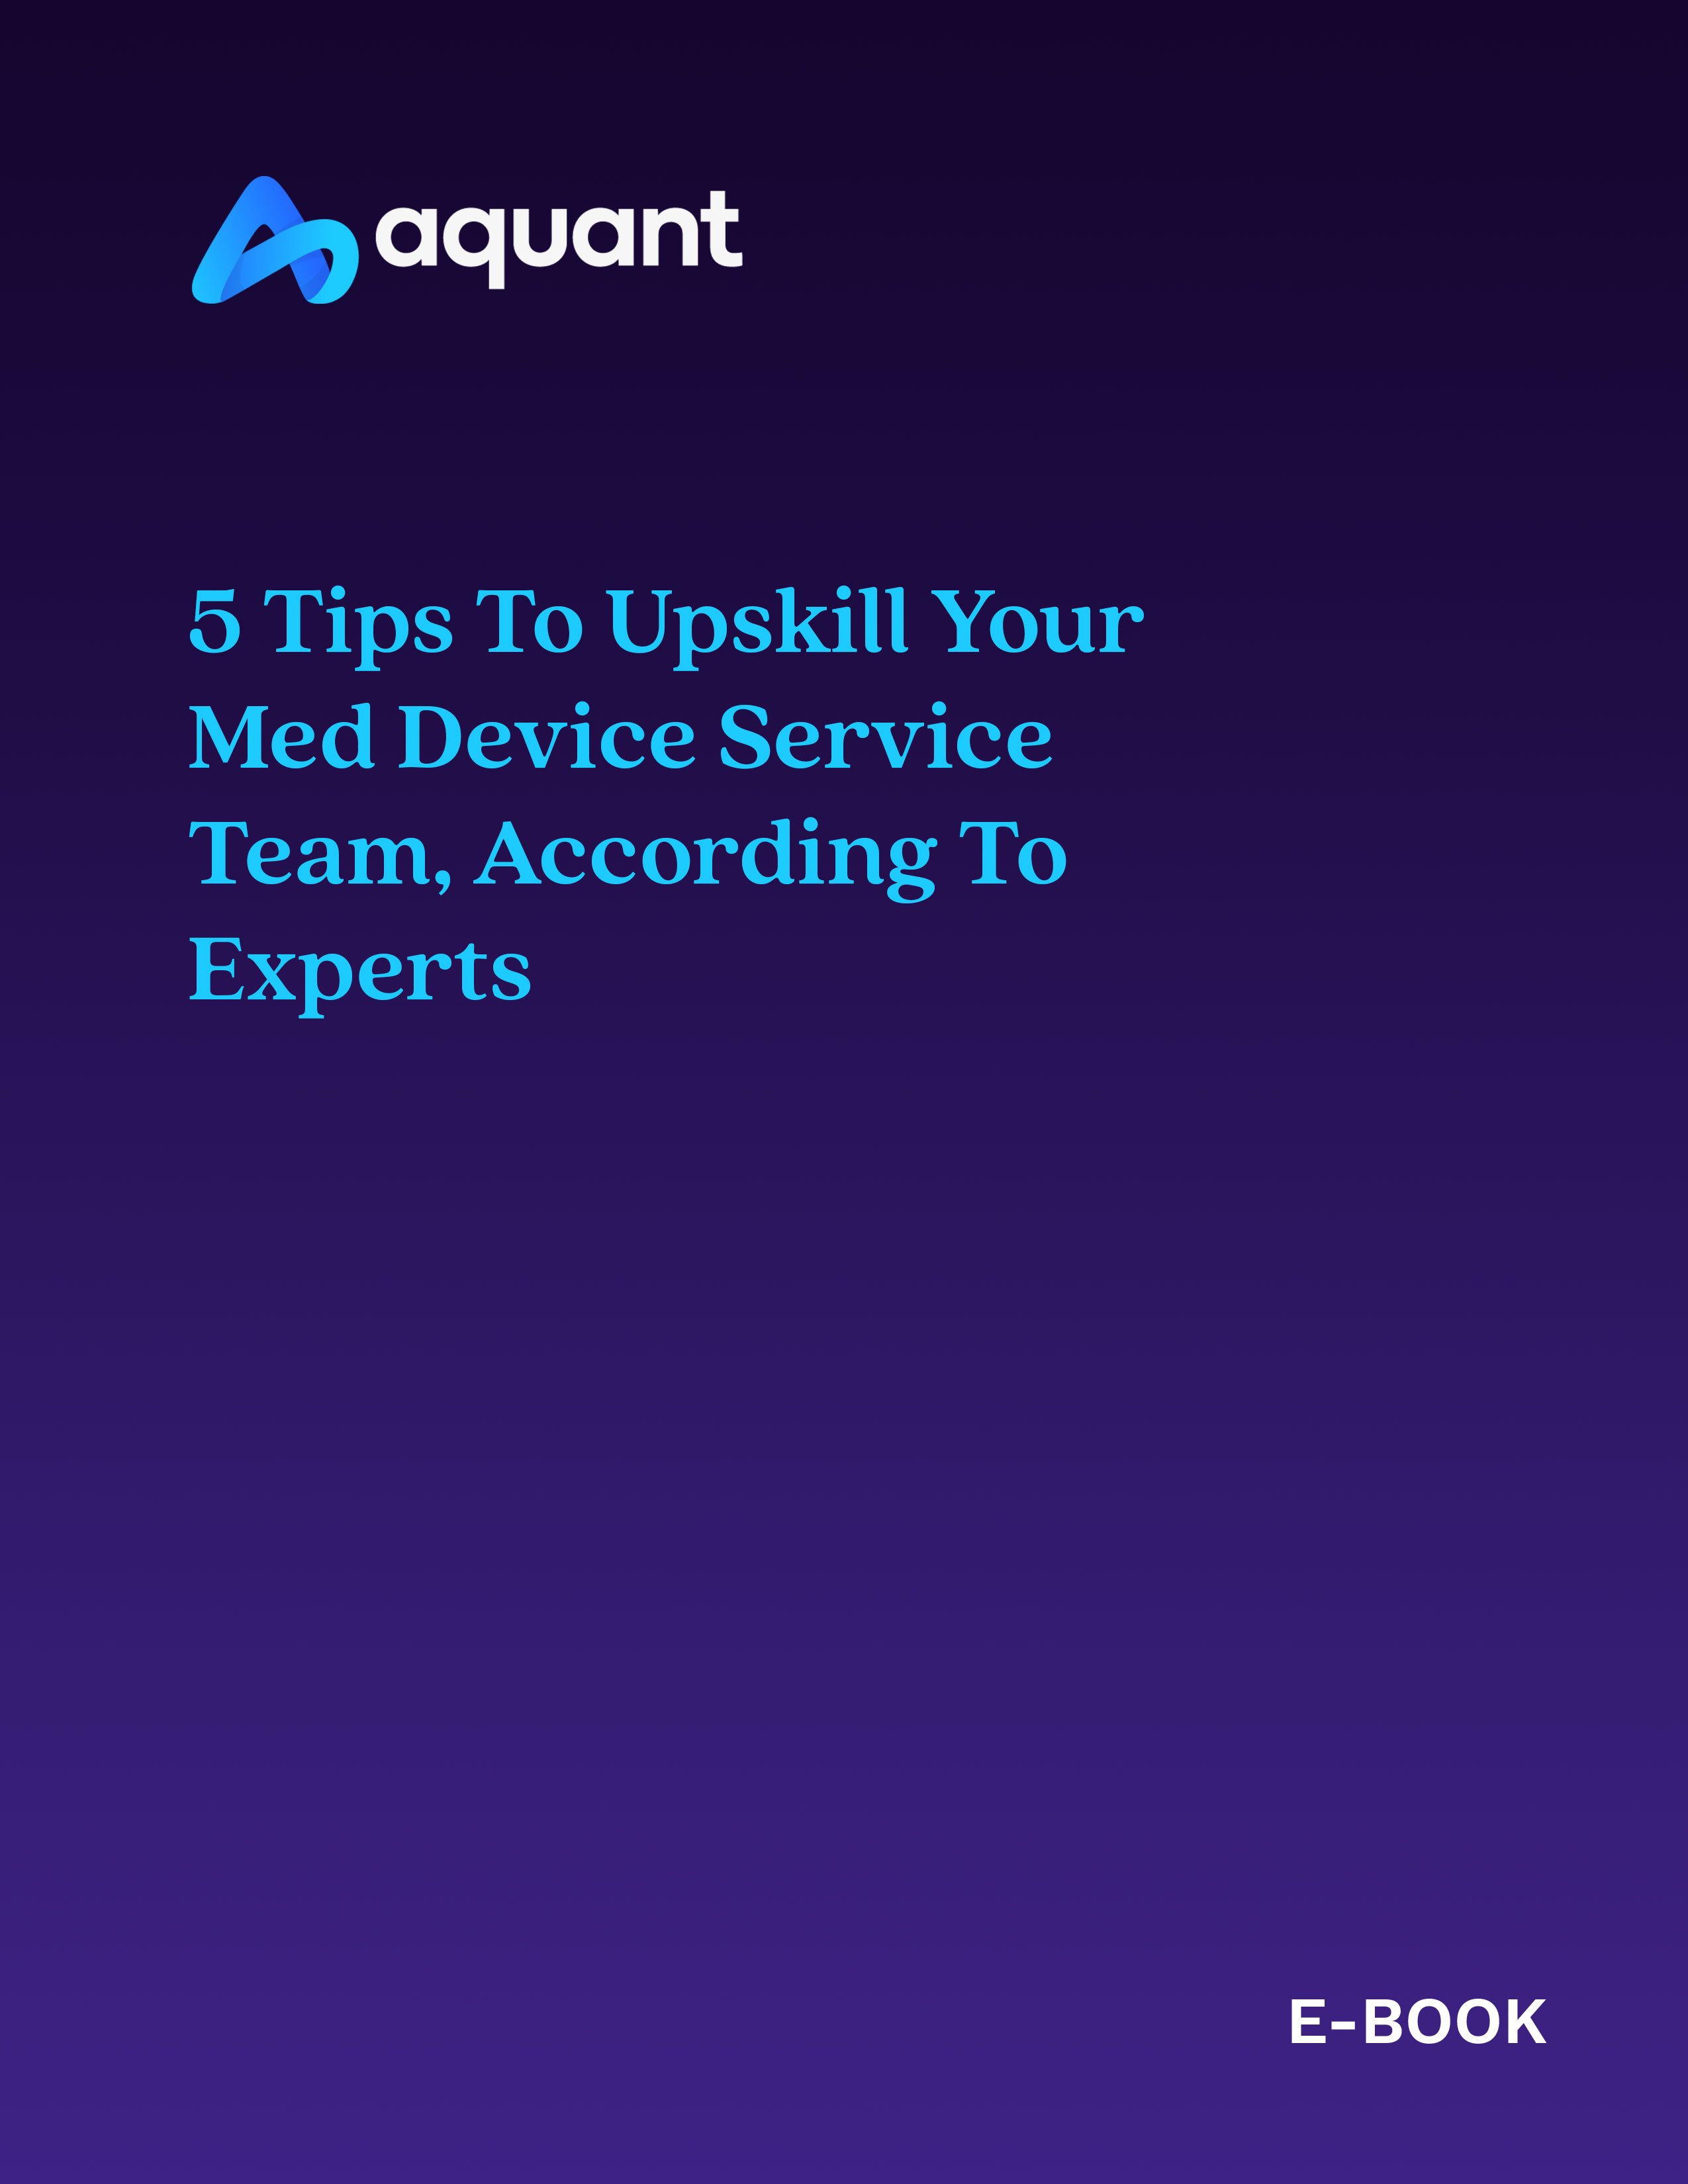 E-Books-_5-Tips-to-Upskill-Your-Med-Device-Service-Team,-According-to-Experts-thumbnail